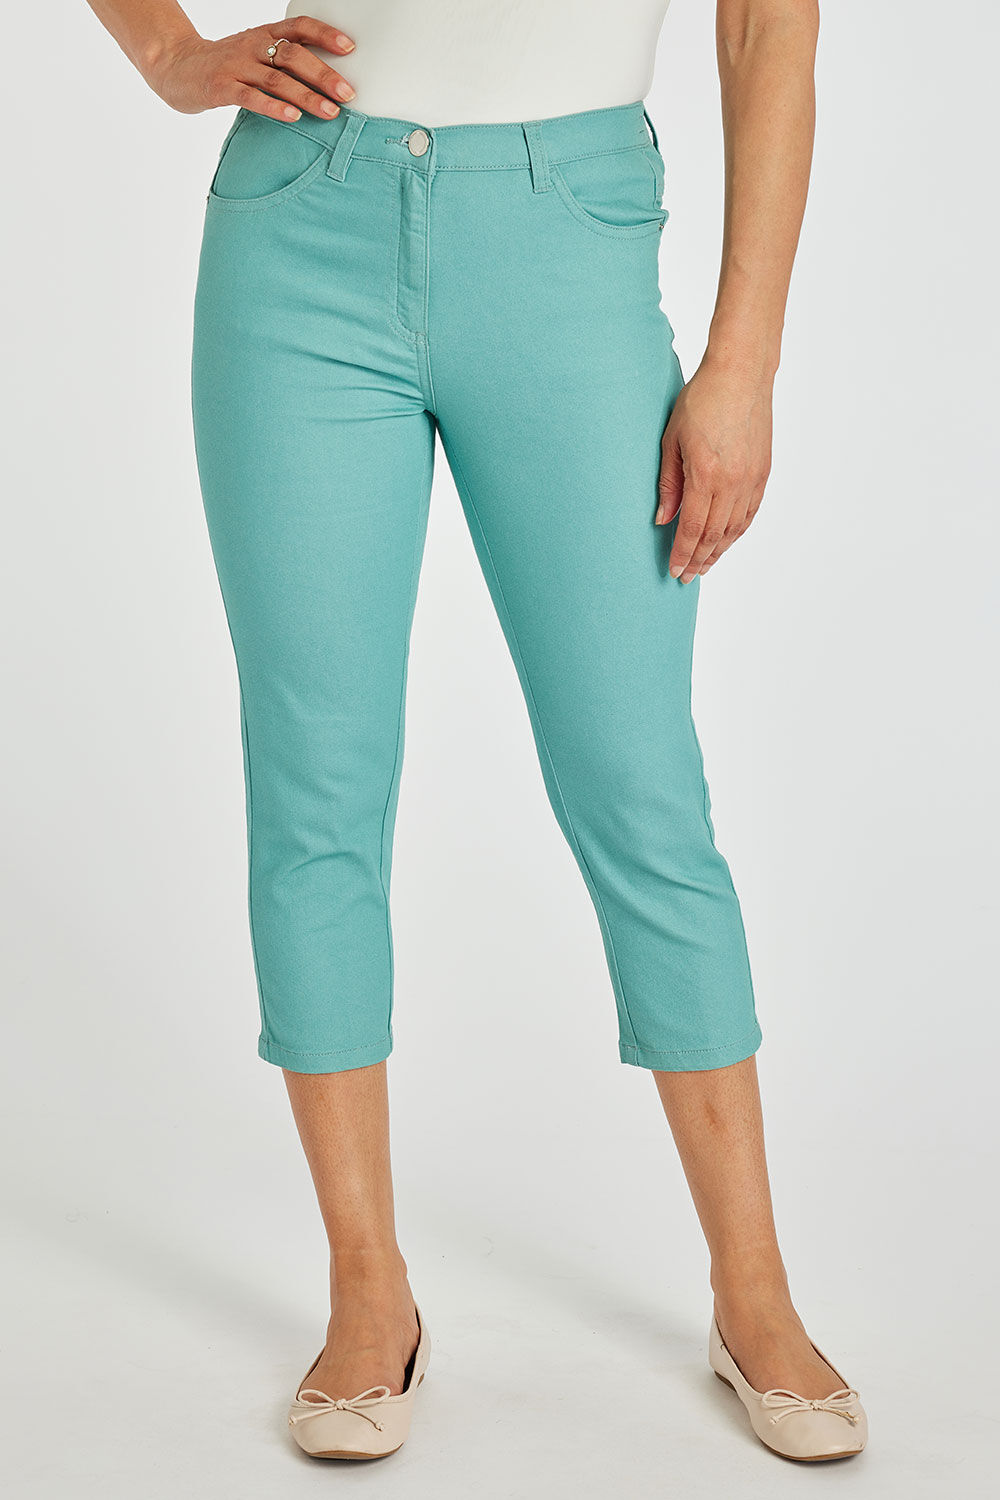 Cropped Trousers  Cropped Pants  Culottes  Verycouk